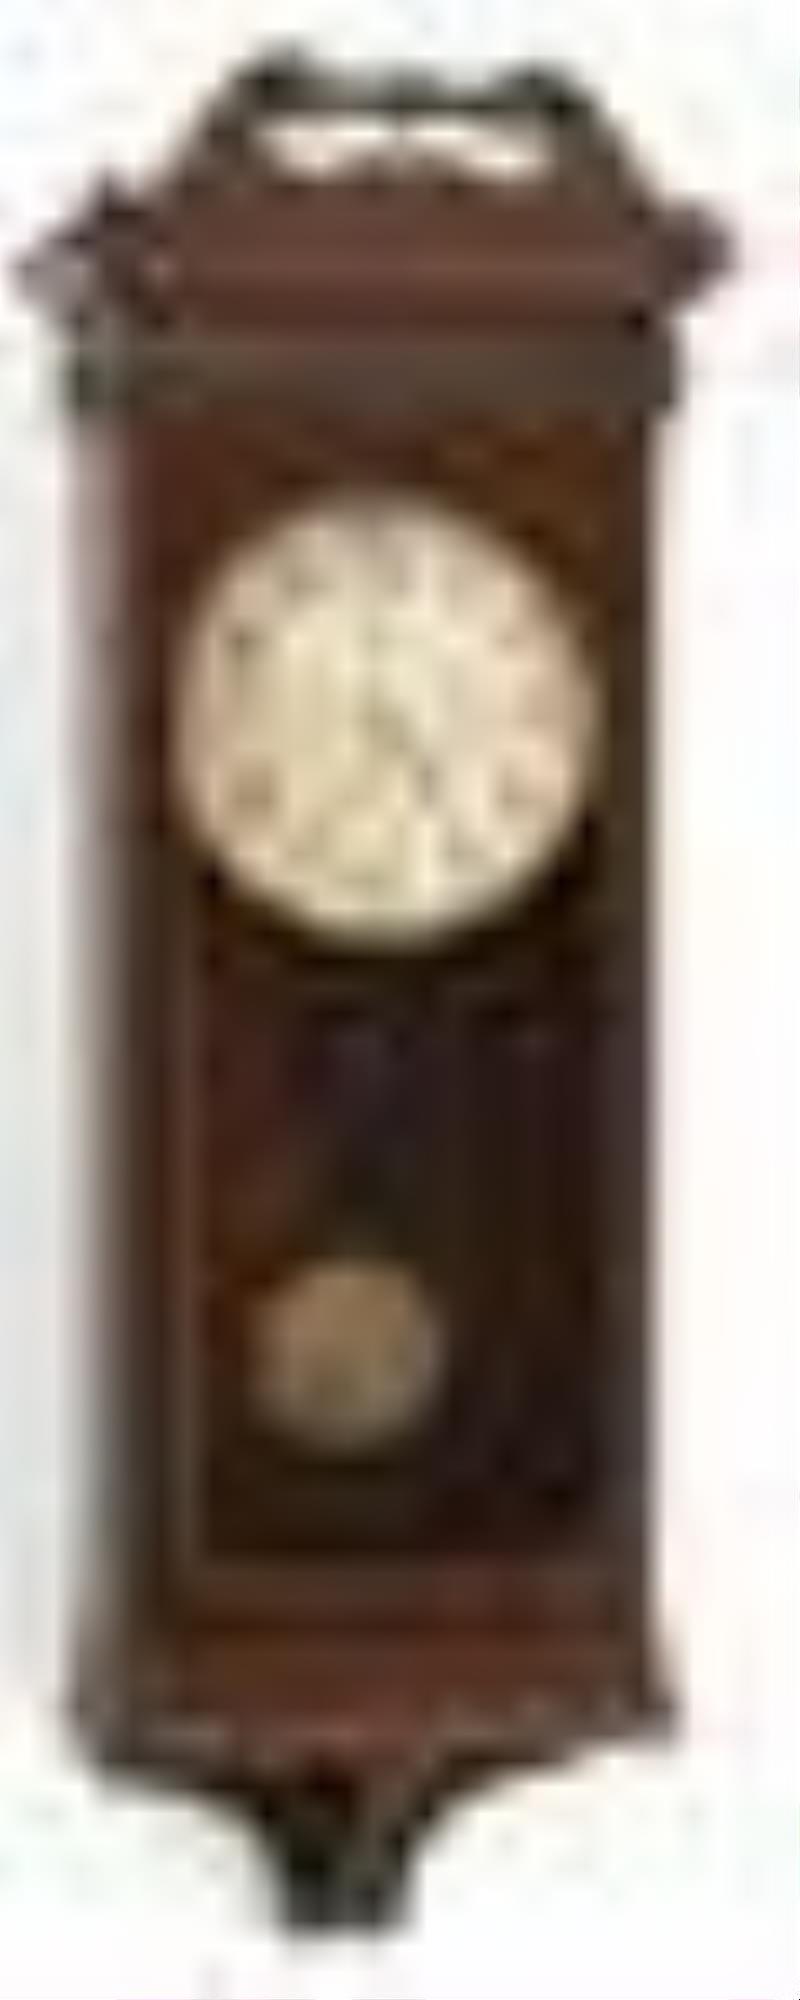 Automatic Electric Clock Co. Wall Clock